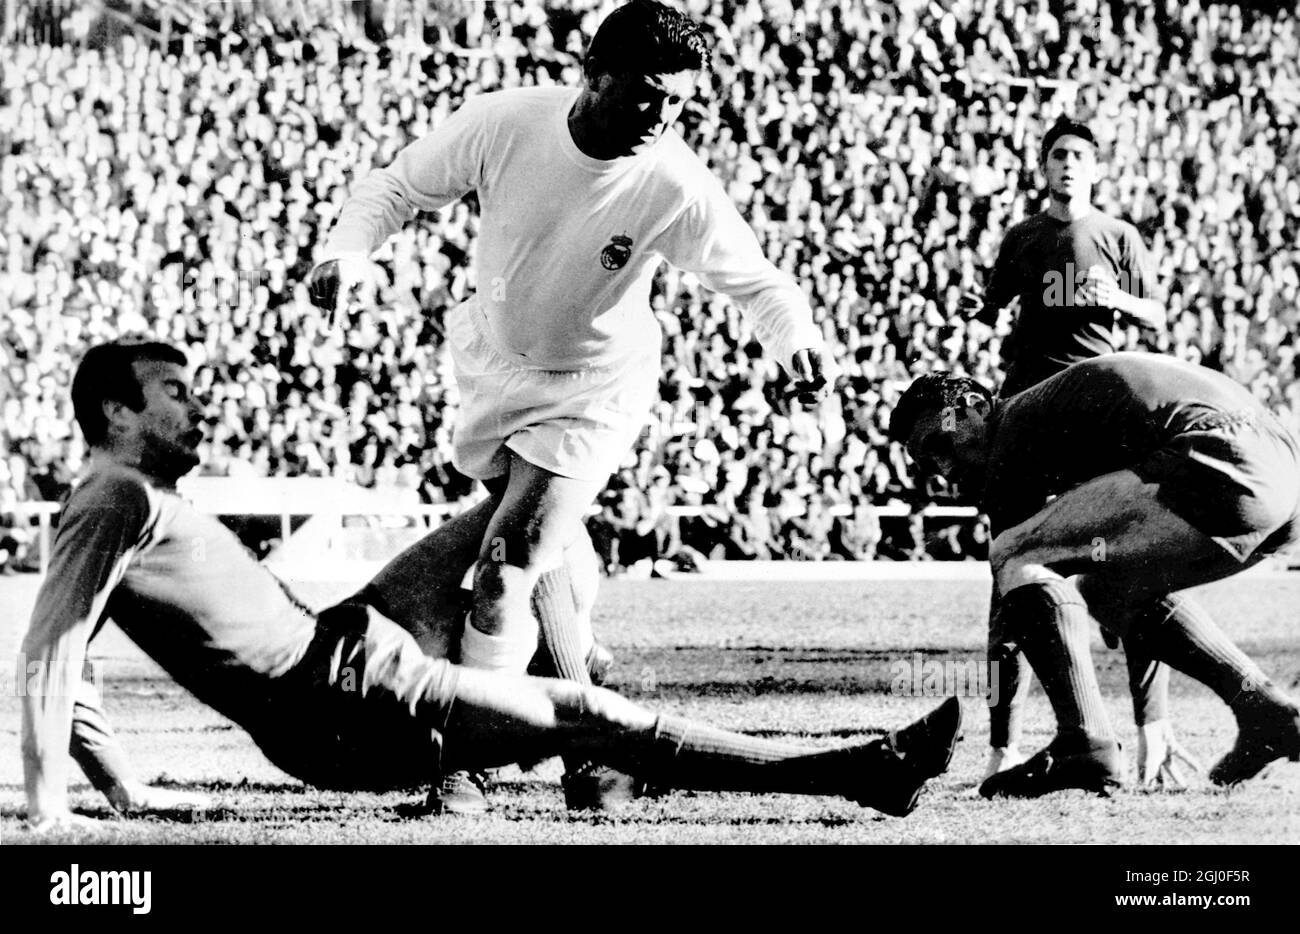 Hungarian exile Ferenc Puskas (in white) who now plays for Real Madrid is pictured in action during a 1962 match between Real Madrid and Oviedo. Stock Photo